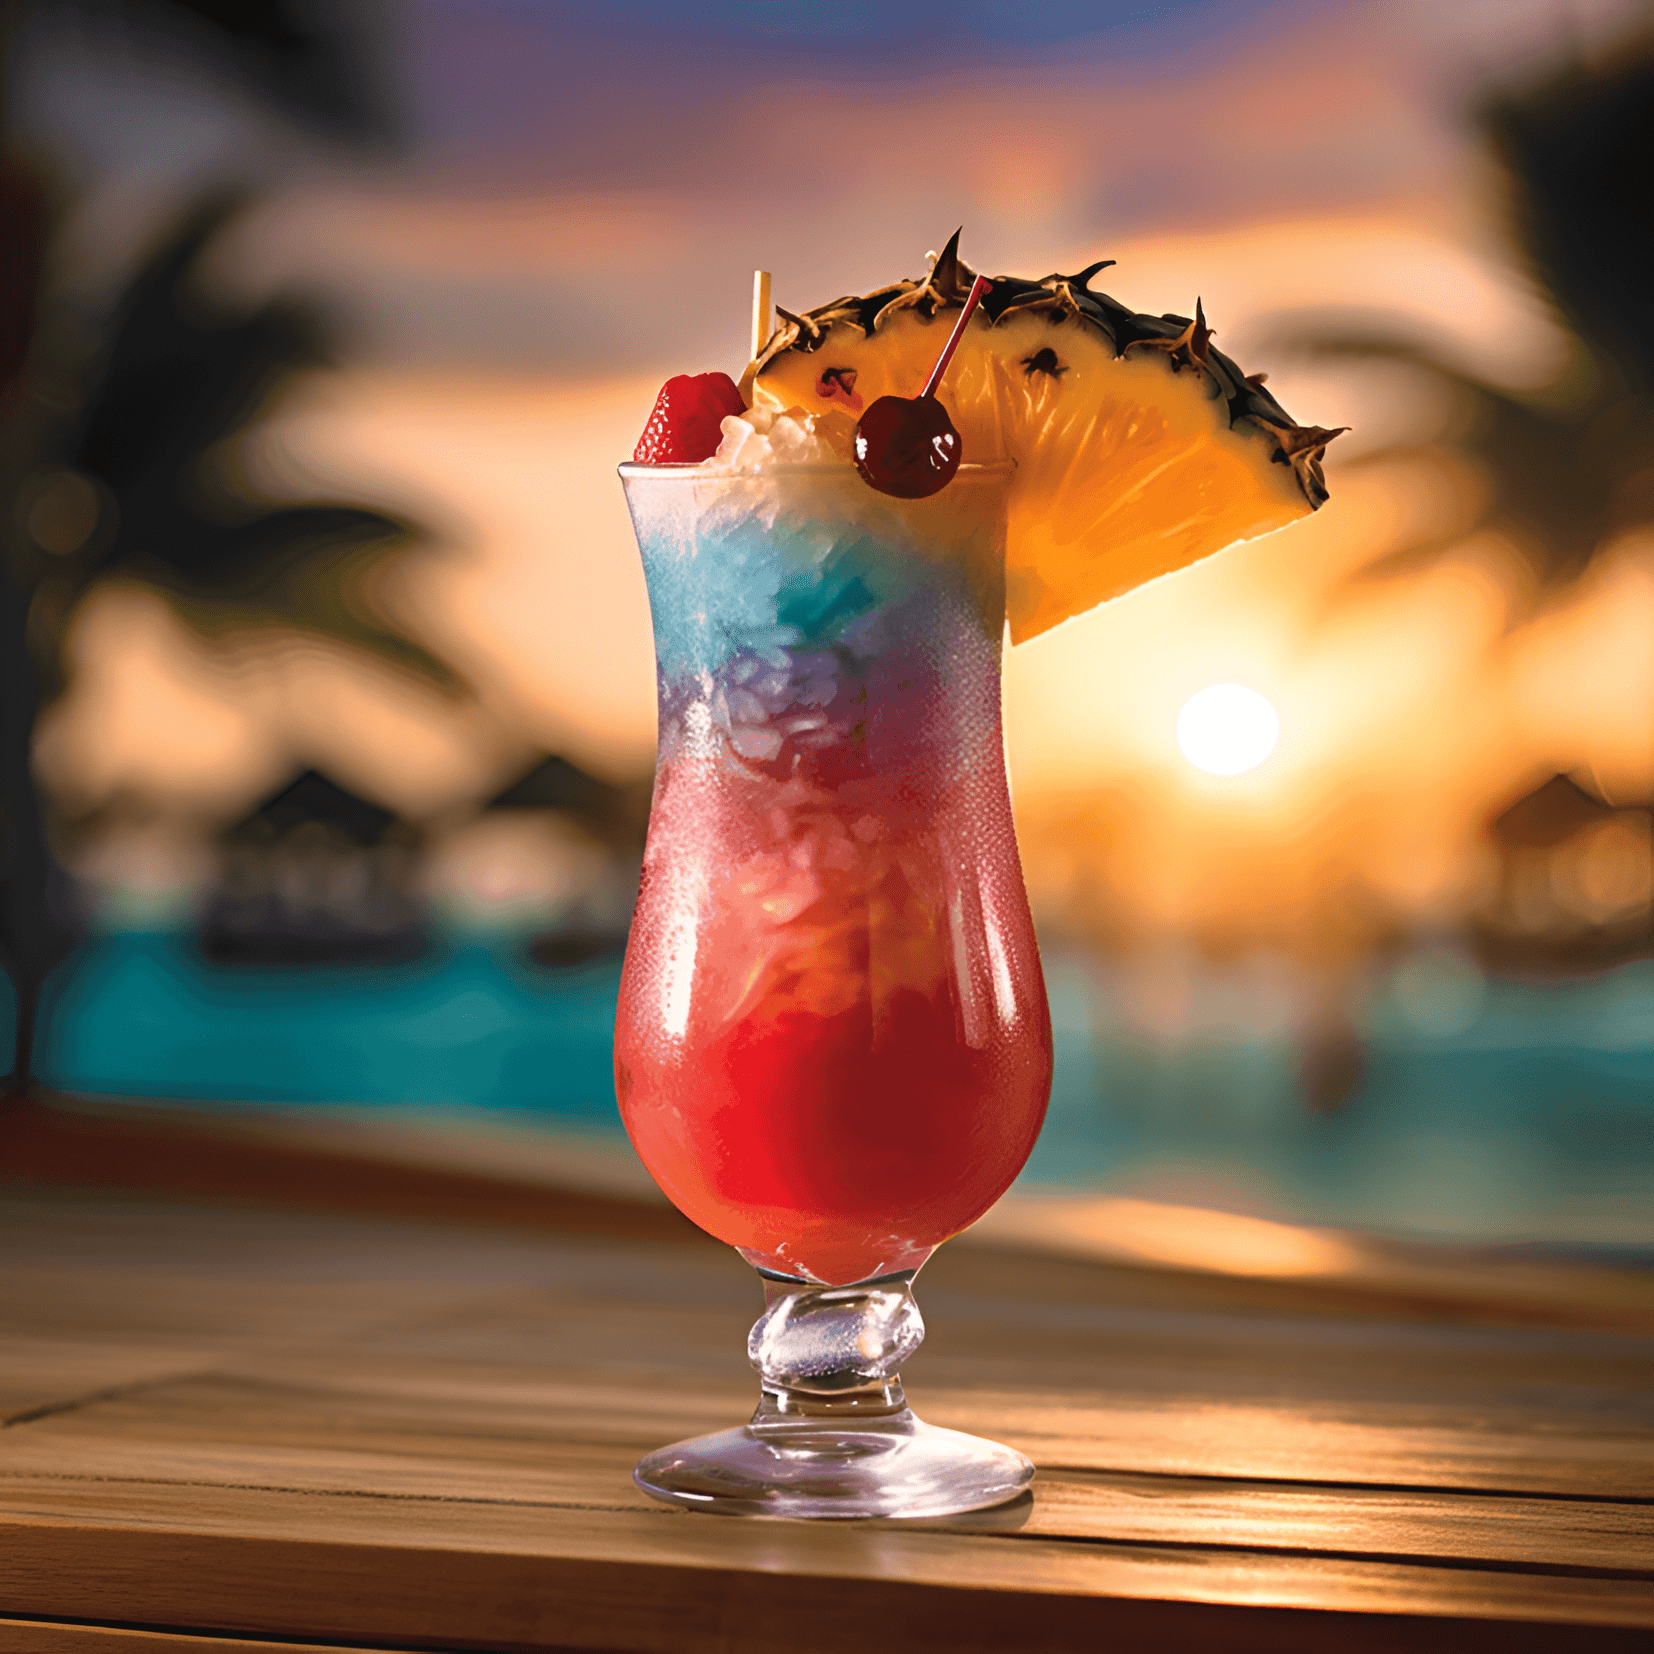 Tahitian Cocktail Recipe - The Tahitian cocktail is a delicious combination of sweet, sour, and fruity flavors. It has a refreshing taste with a hint of tropical tanginess. The drink is light and easy to sip, making it perfect for warm summer days or beachside lounging.